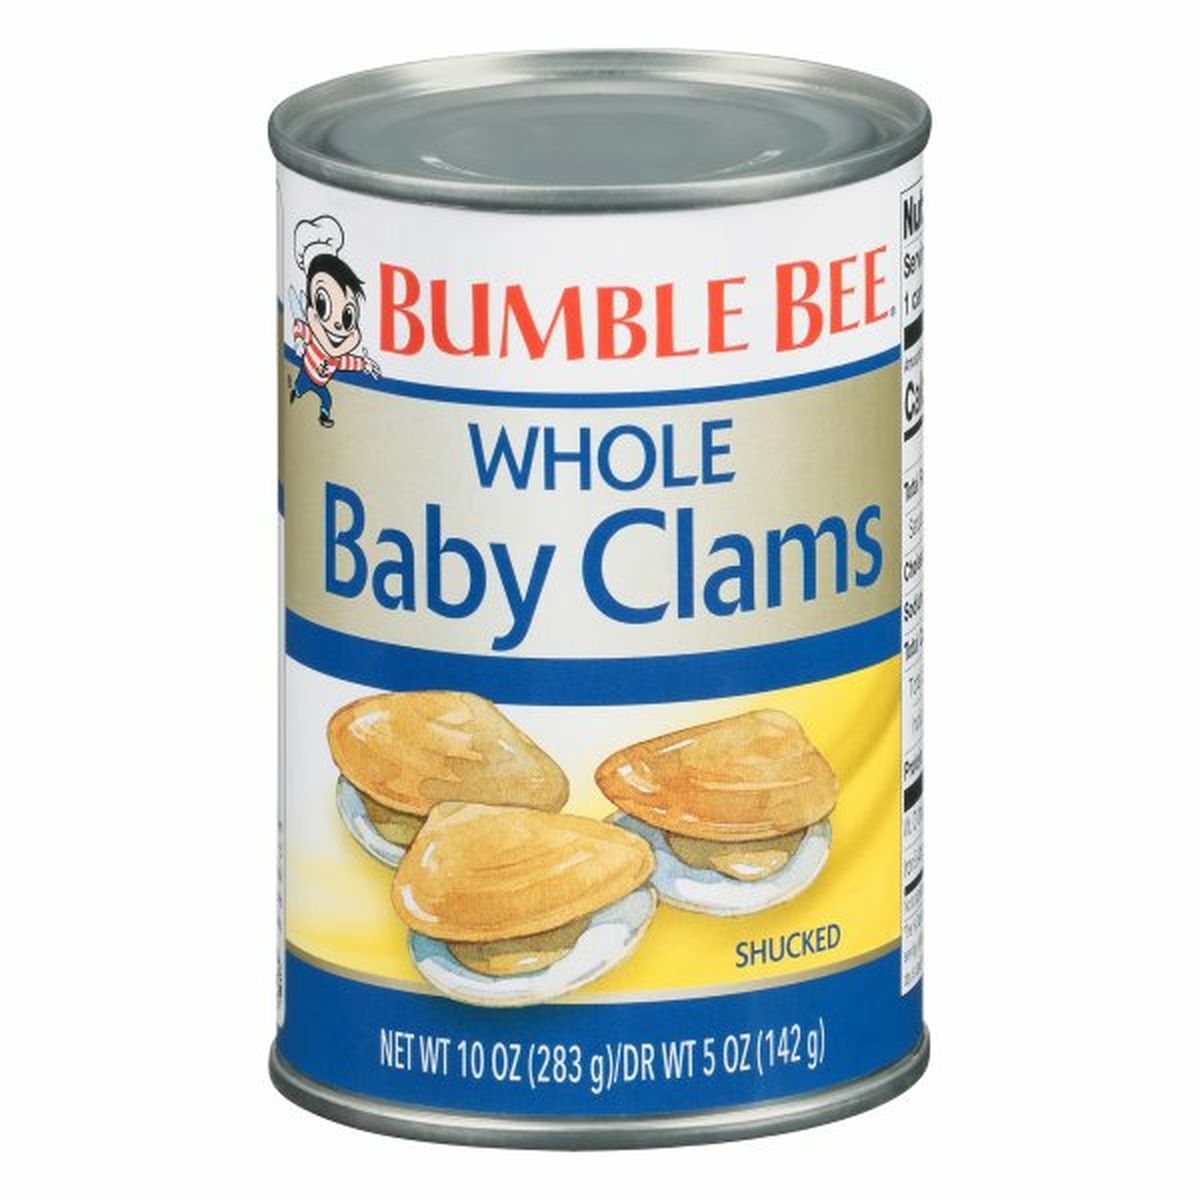 Calories in Bumble Bee Baby Clams, Whole, Shucked